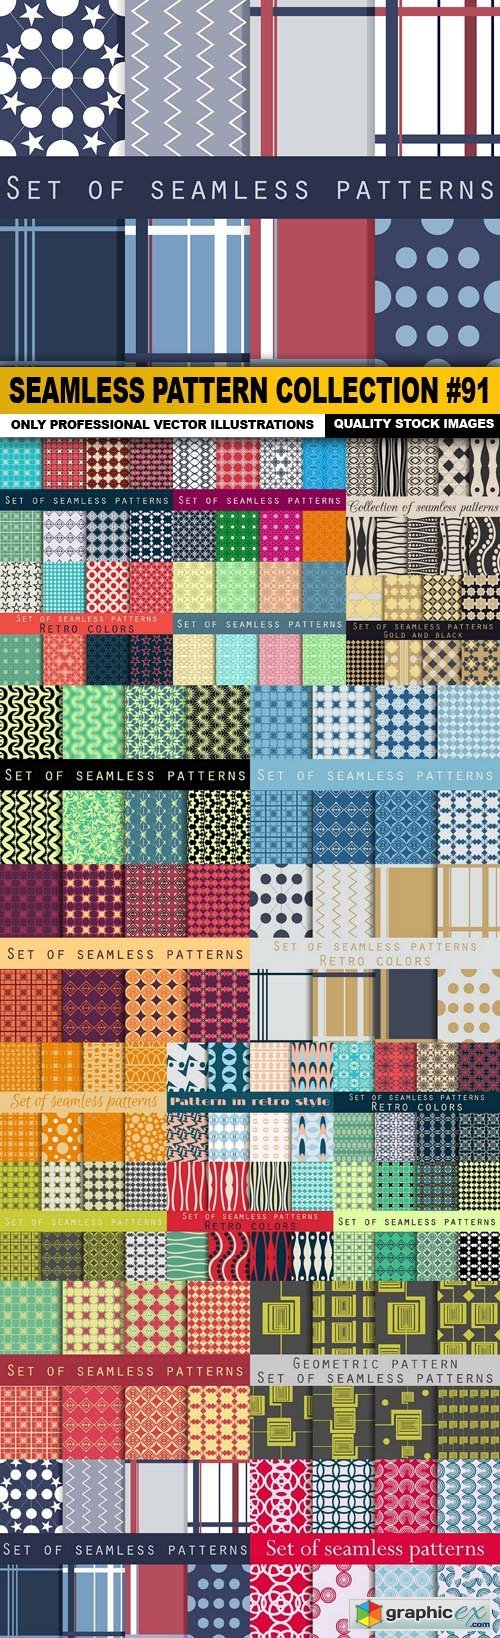 Seamless Pattern Collection #91 - 20 Vector